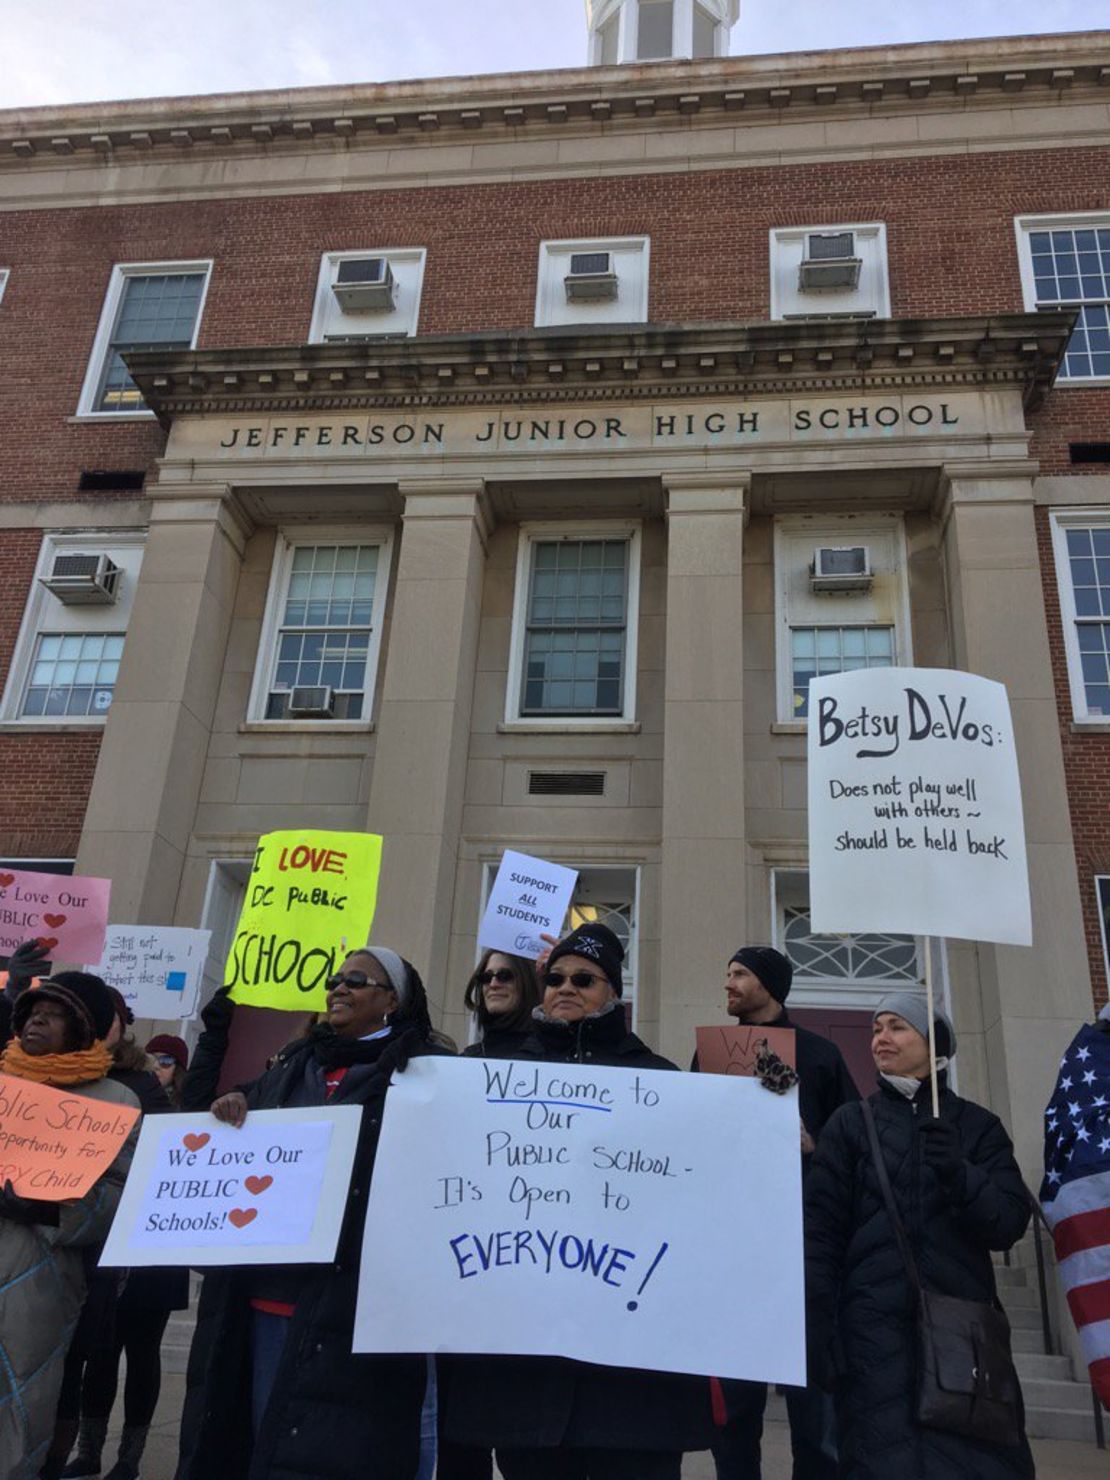 Protesters gather outside Jefferson Middle School Academy in Washington to oppose a visit by Secretary of Education Betsy DeVos.